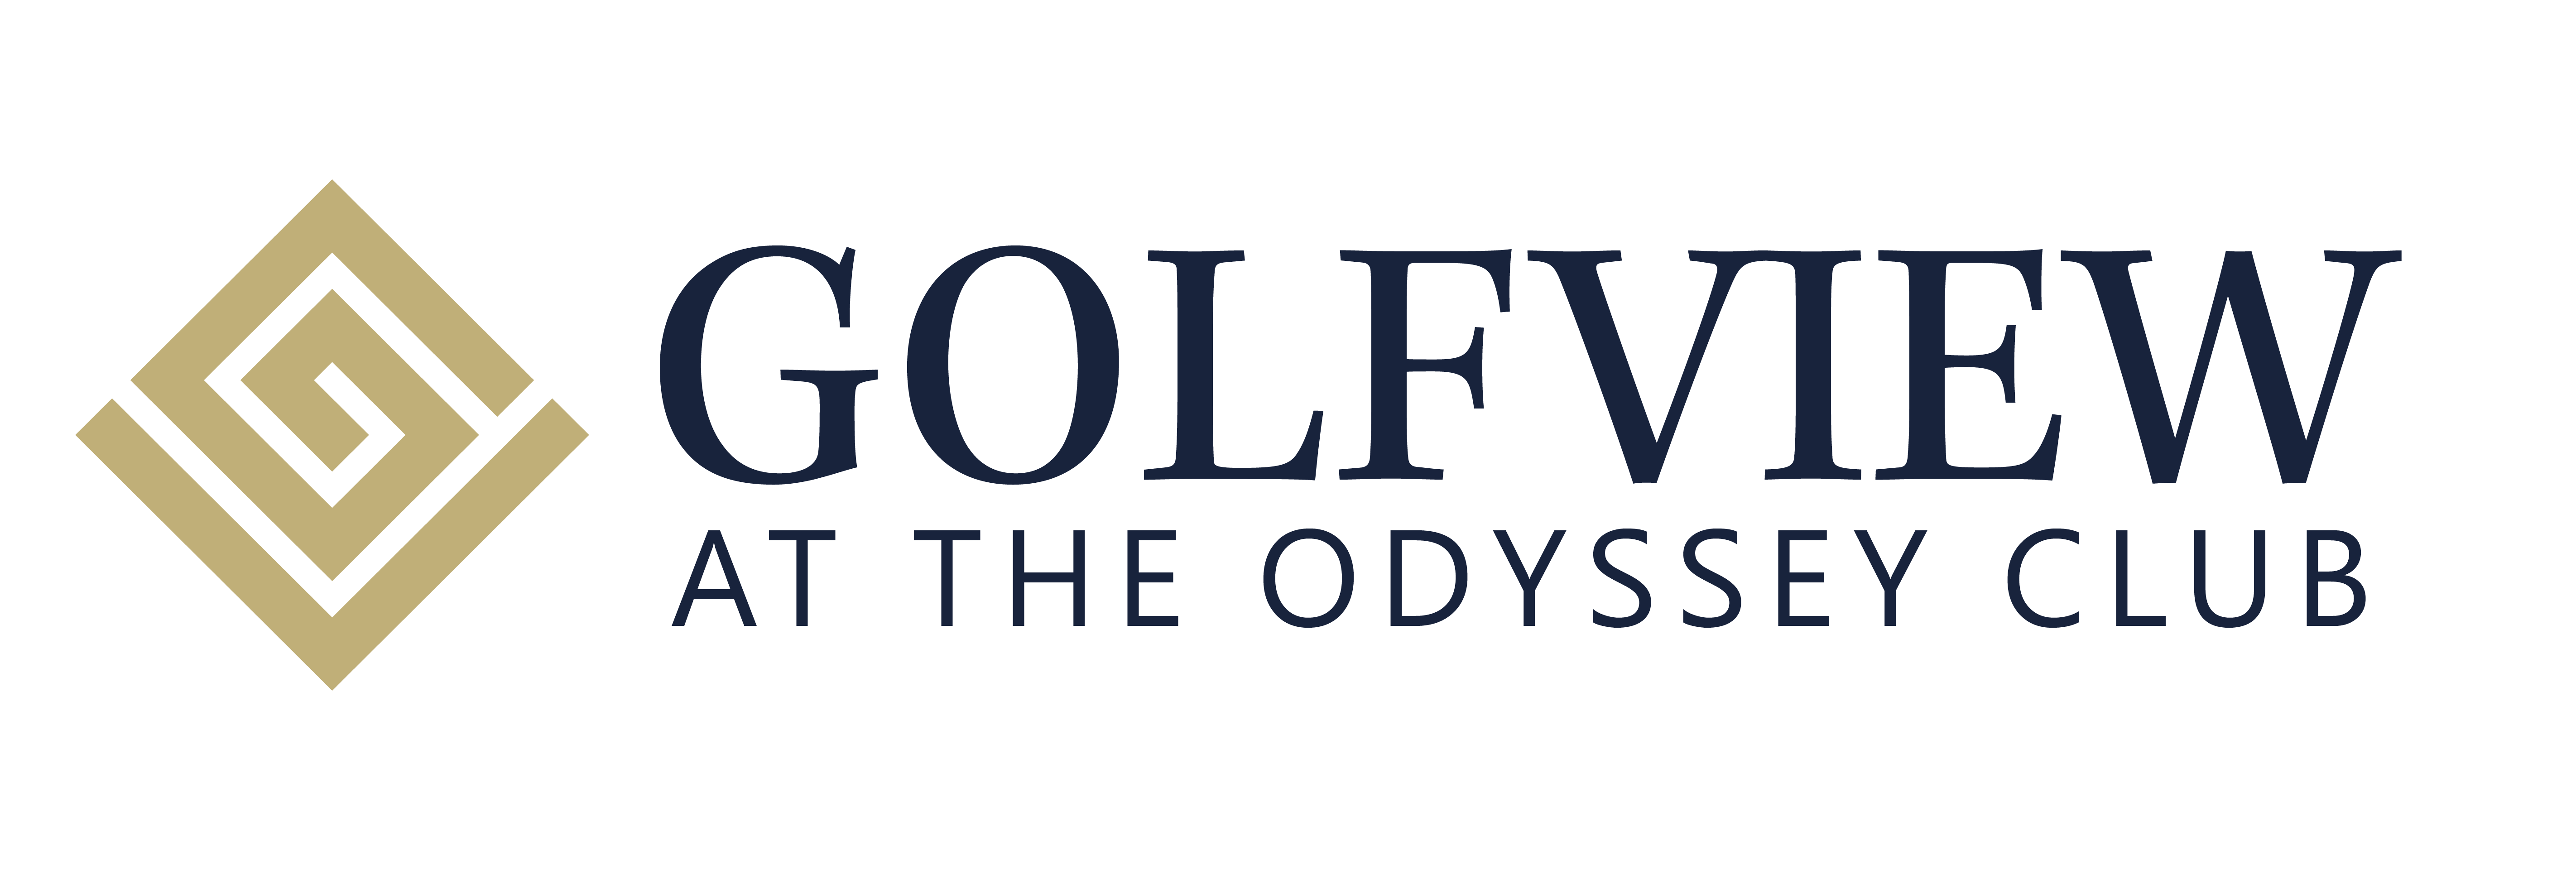 Golfview at The Odyssey Club - Luxury townhome living in Tinley Park.